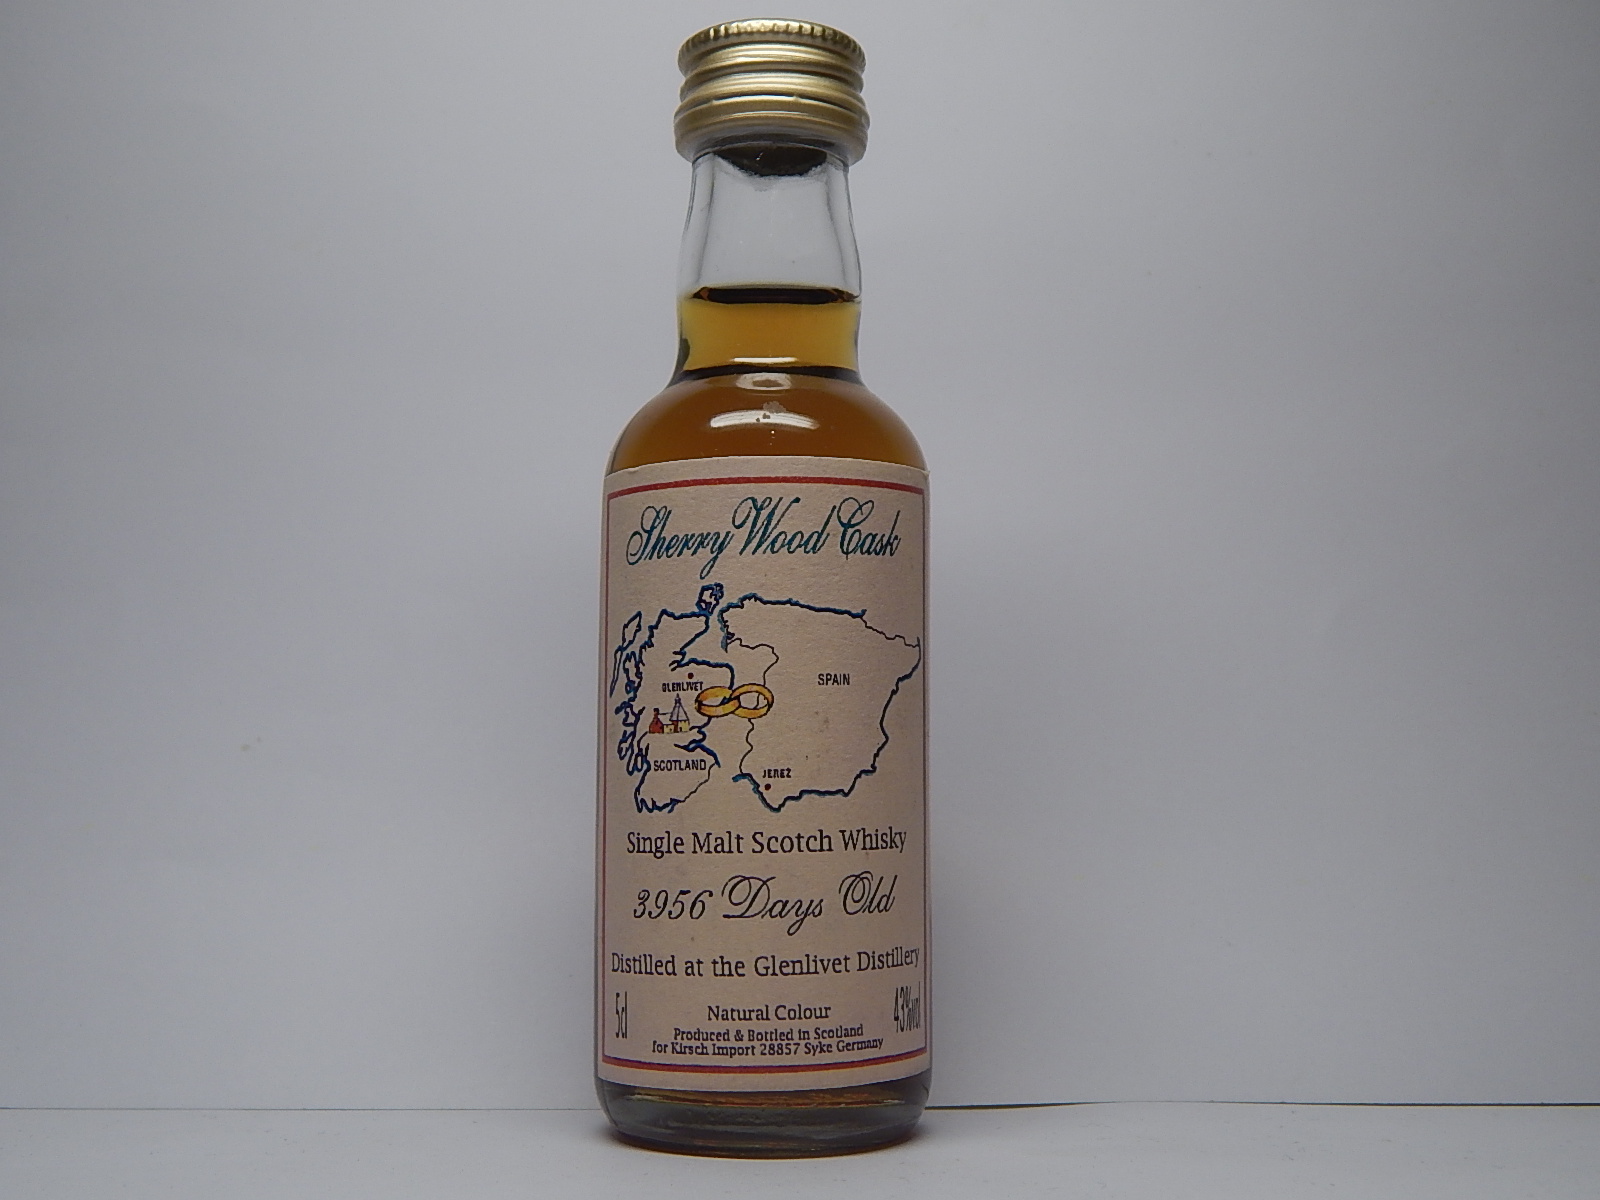 Sherry Wood Cask SMSW 3956 Days Old 5cl 43%vol